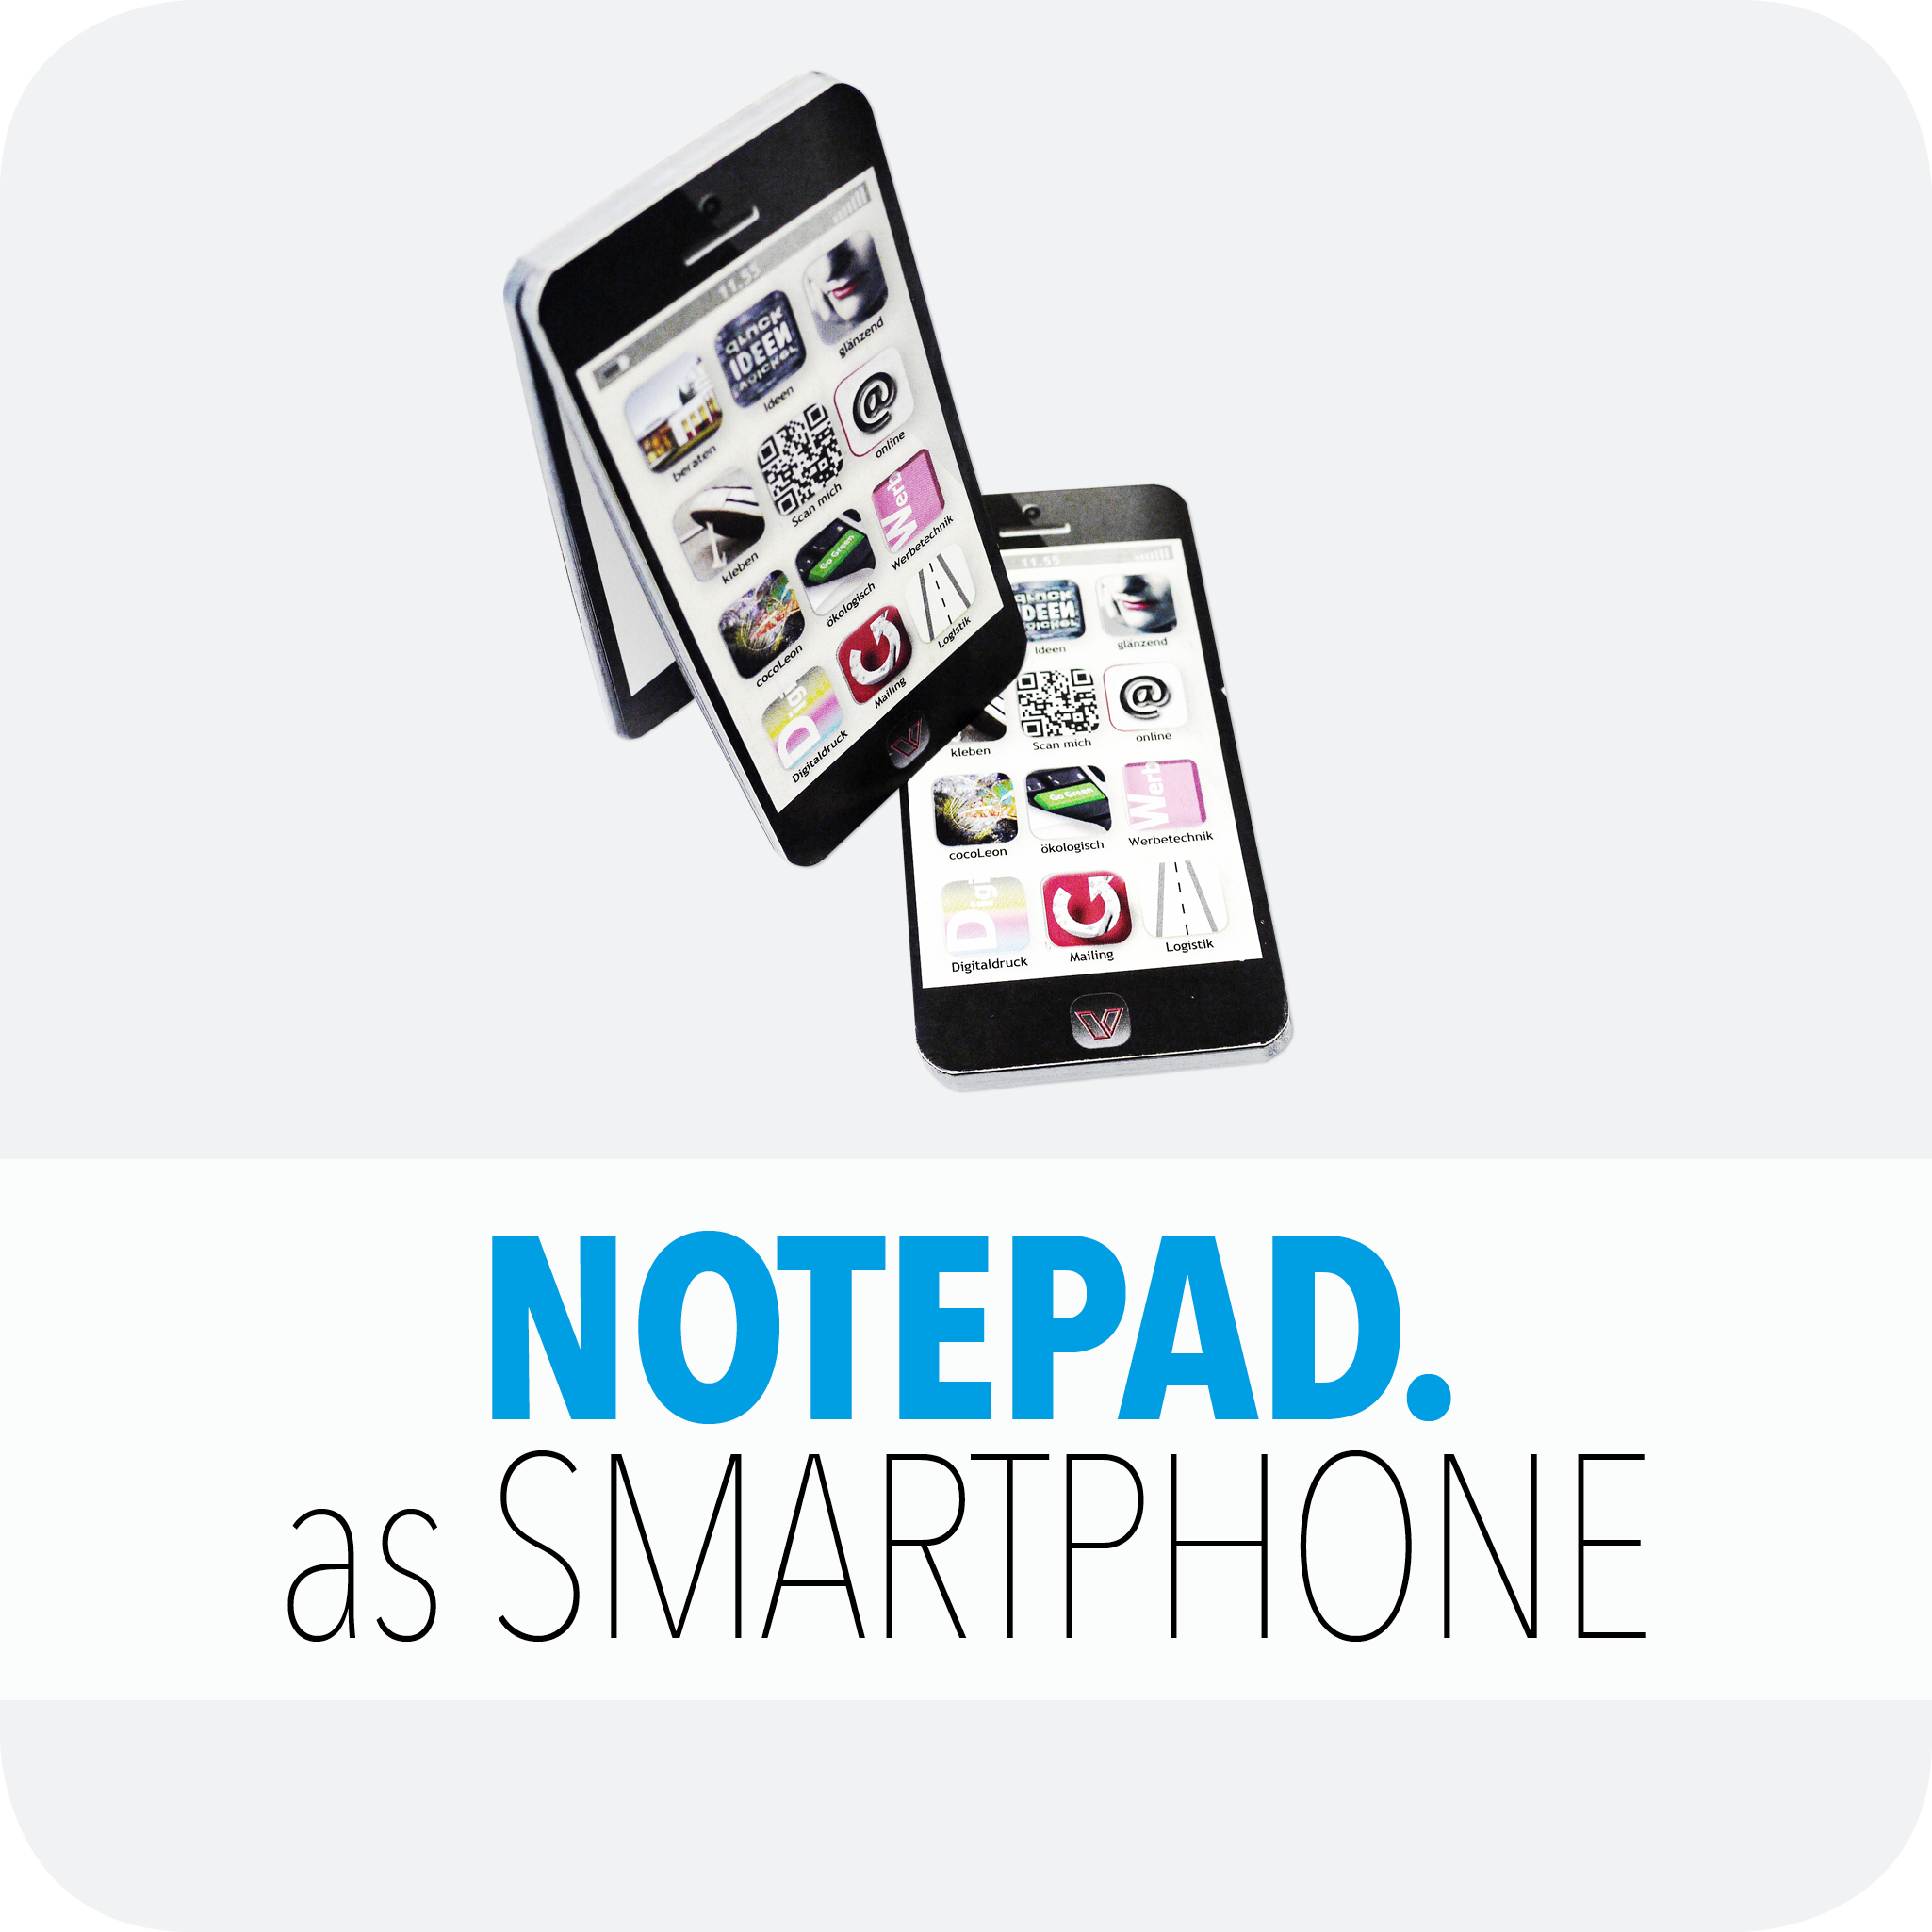 Notepad as Smartphone